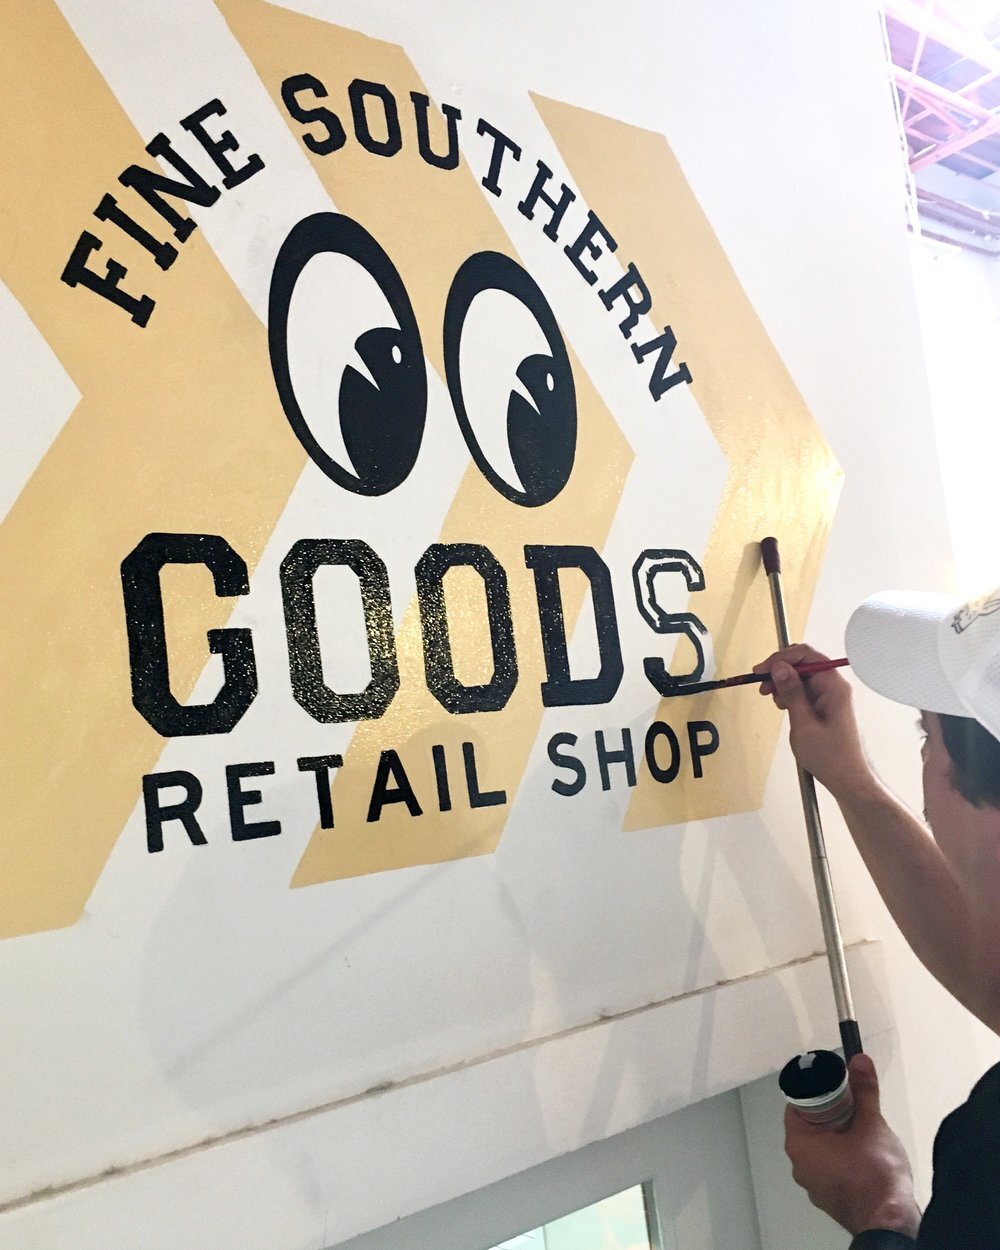 hand painted sign for fine southern goods retail shop